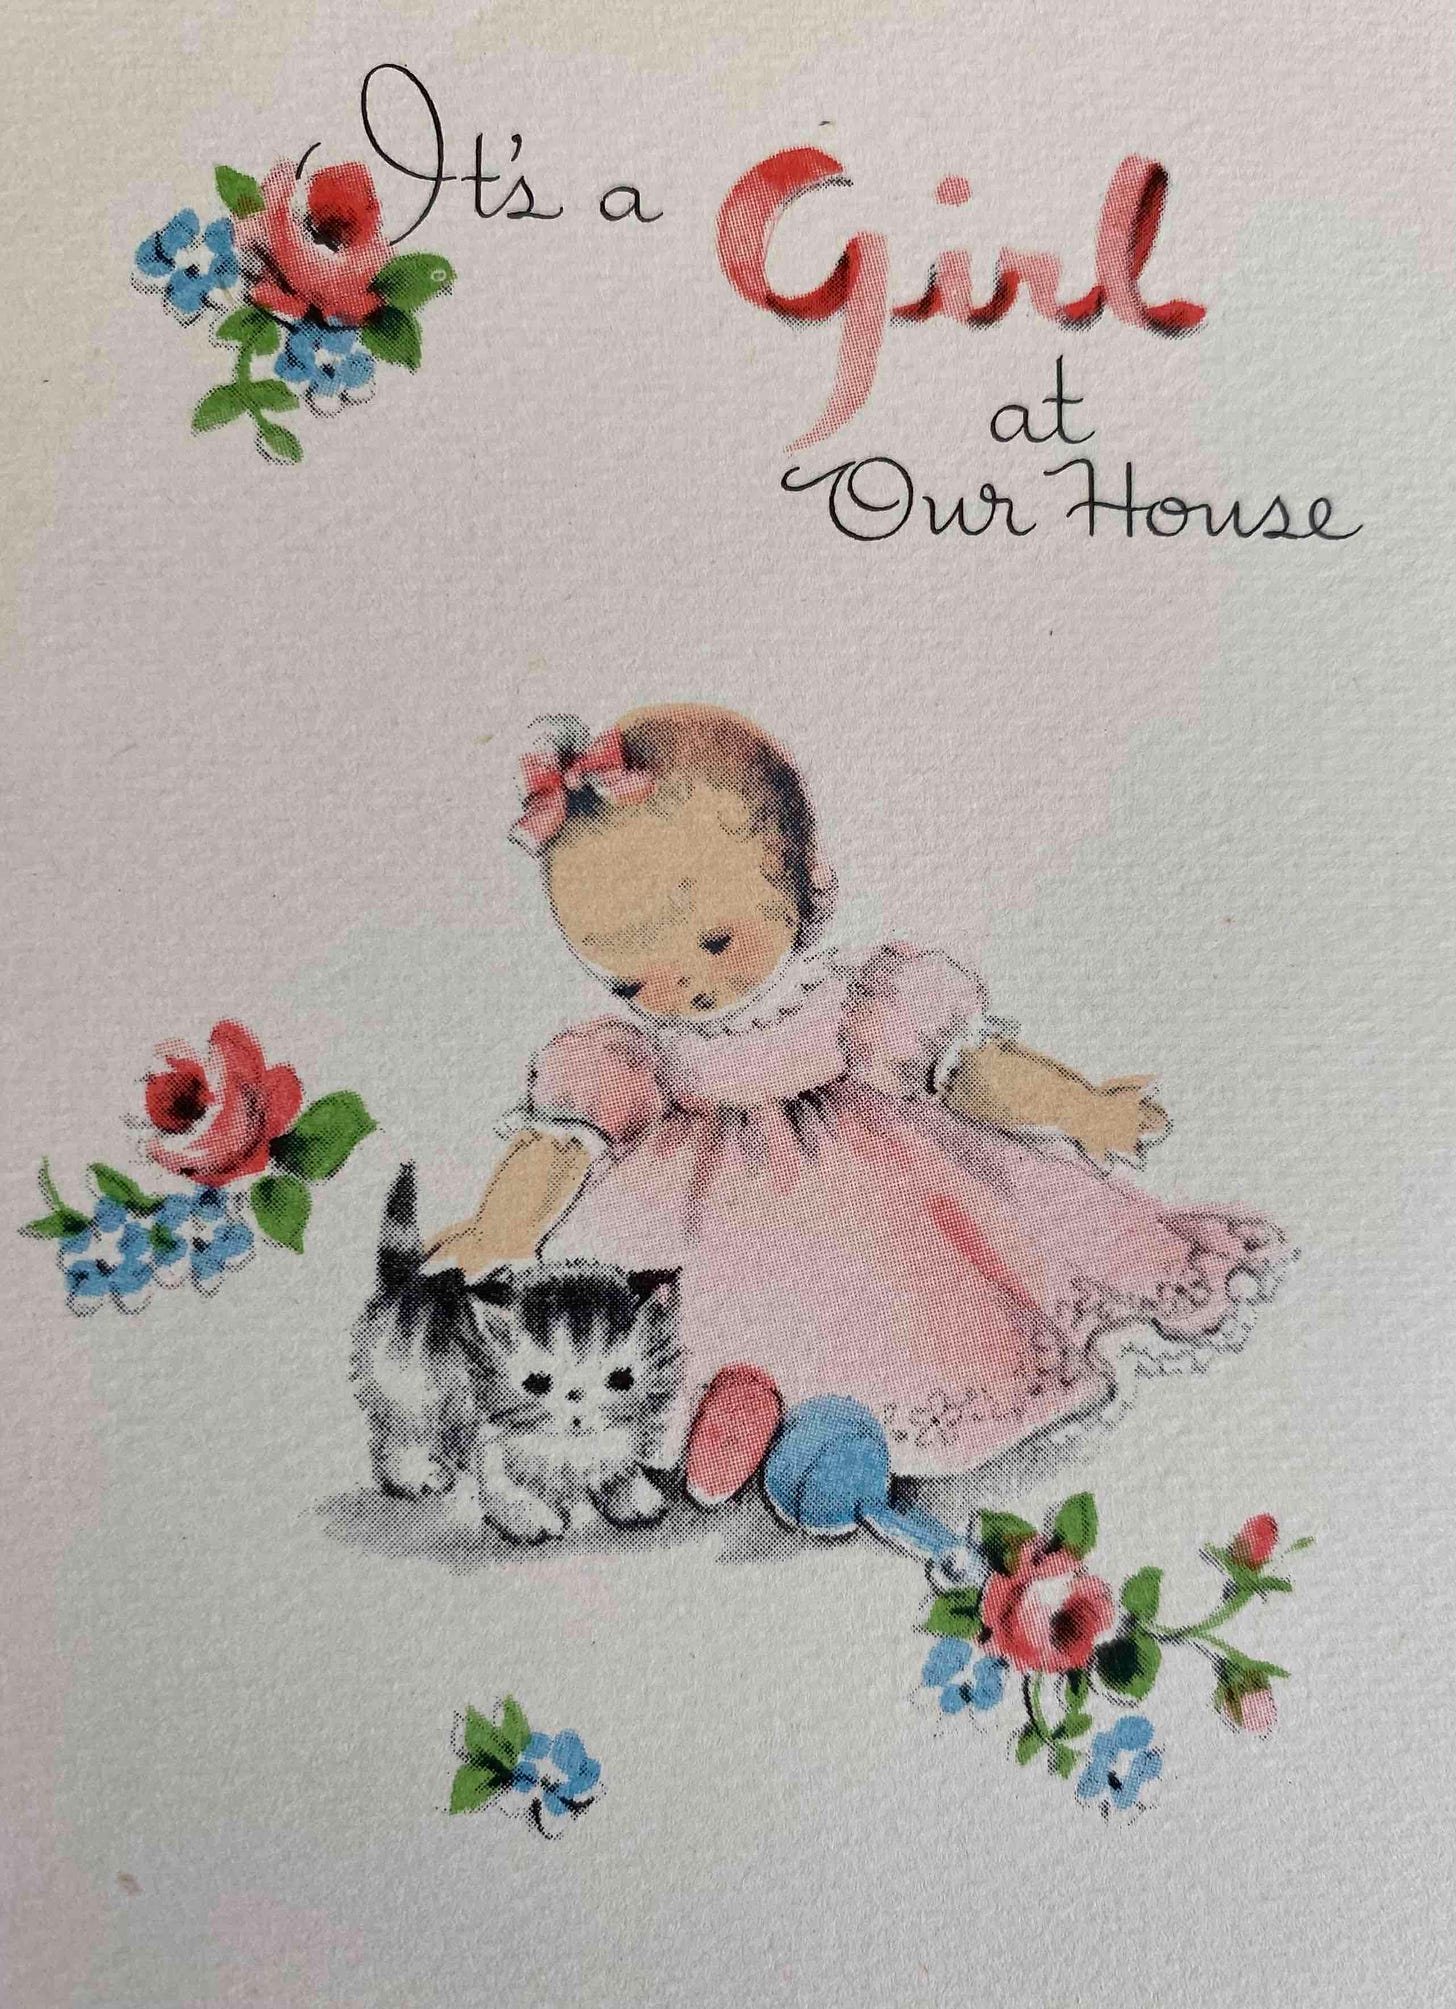 Baby wearing a frilly pink dress and a pink hair bow is petting a tiny gray striped kitten. The caption reads"It's a girl at our house". 